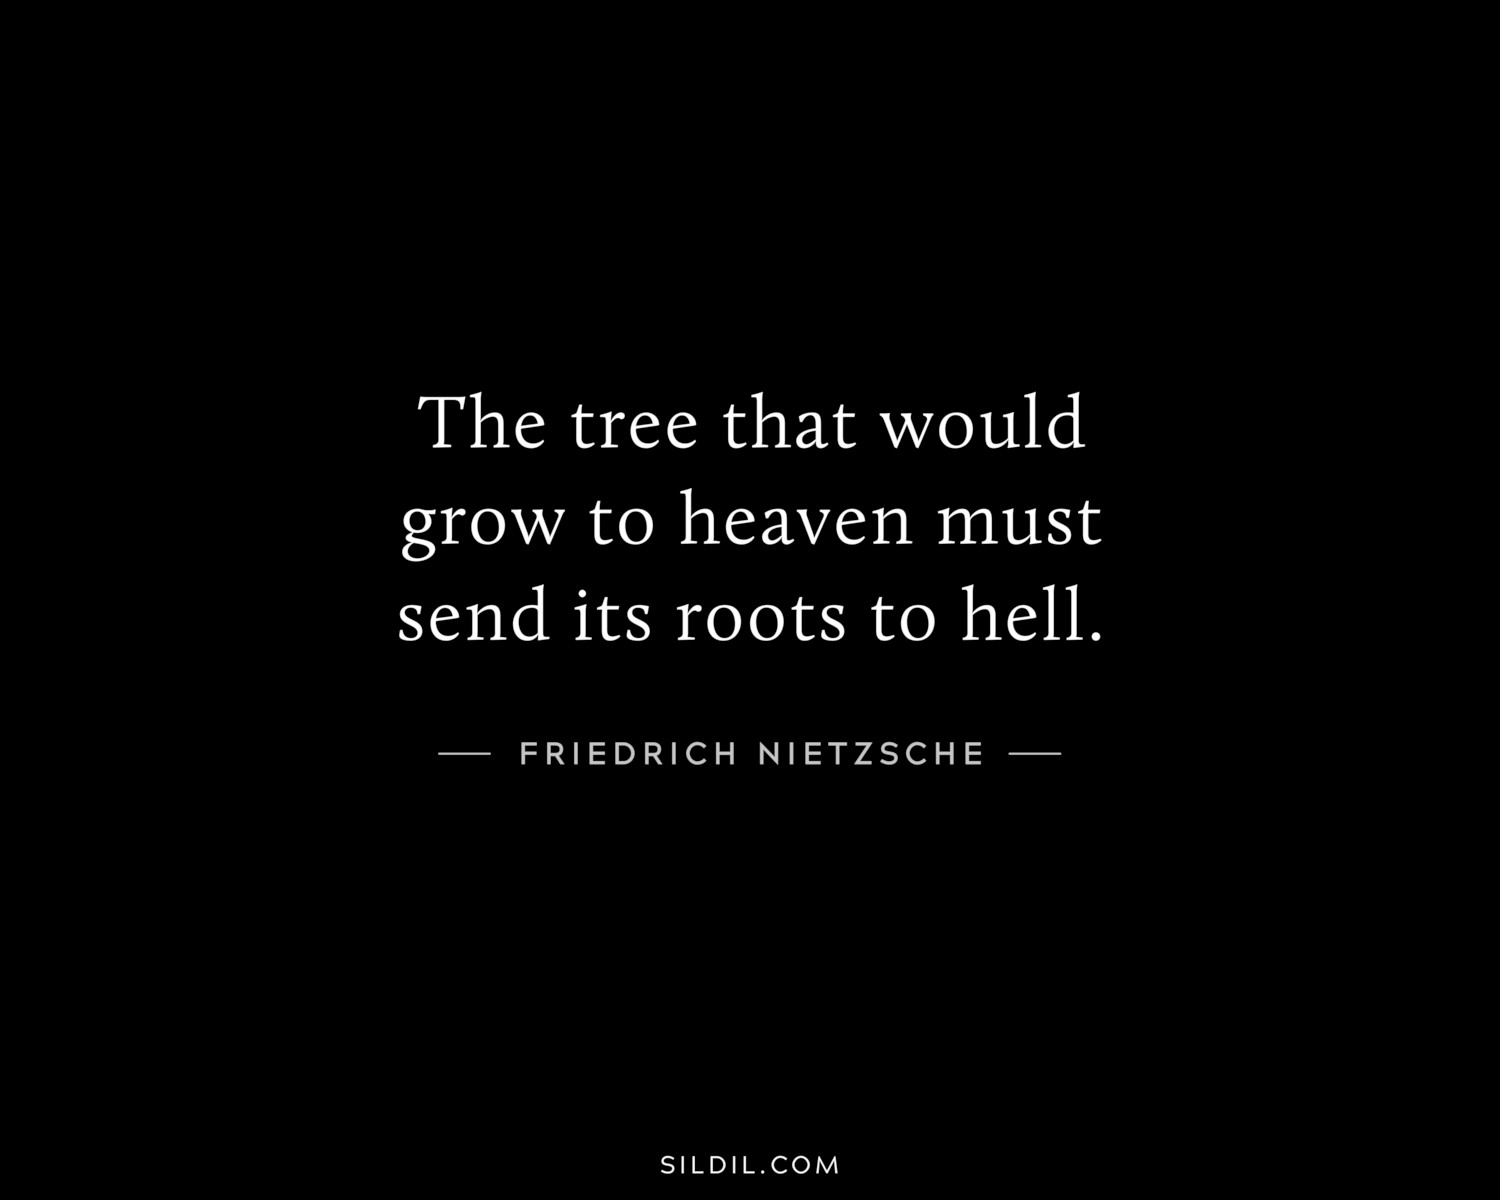 The tree that would grow to heaven must send its roots to hell.